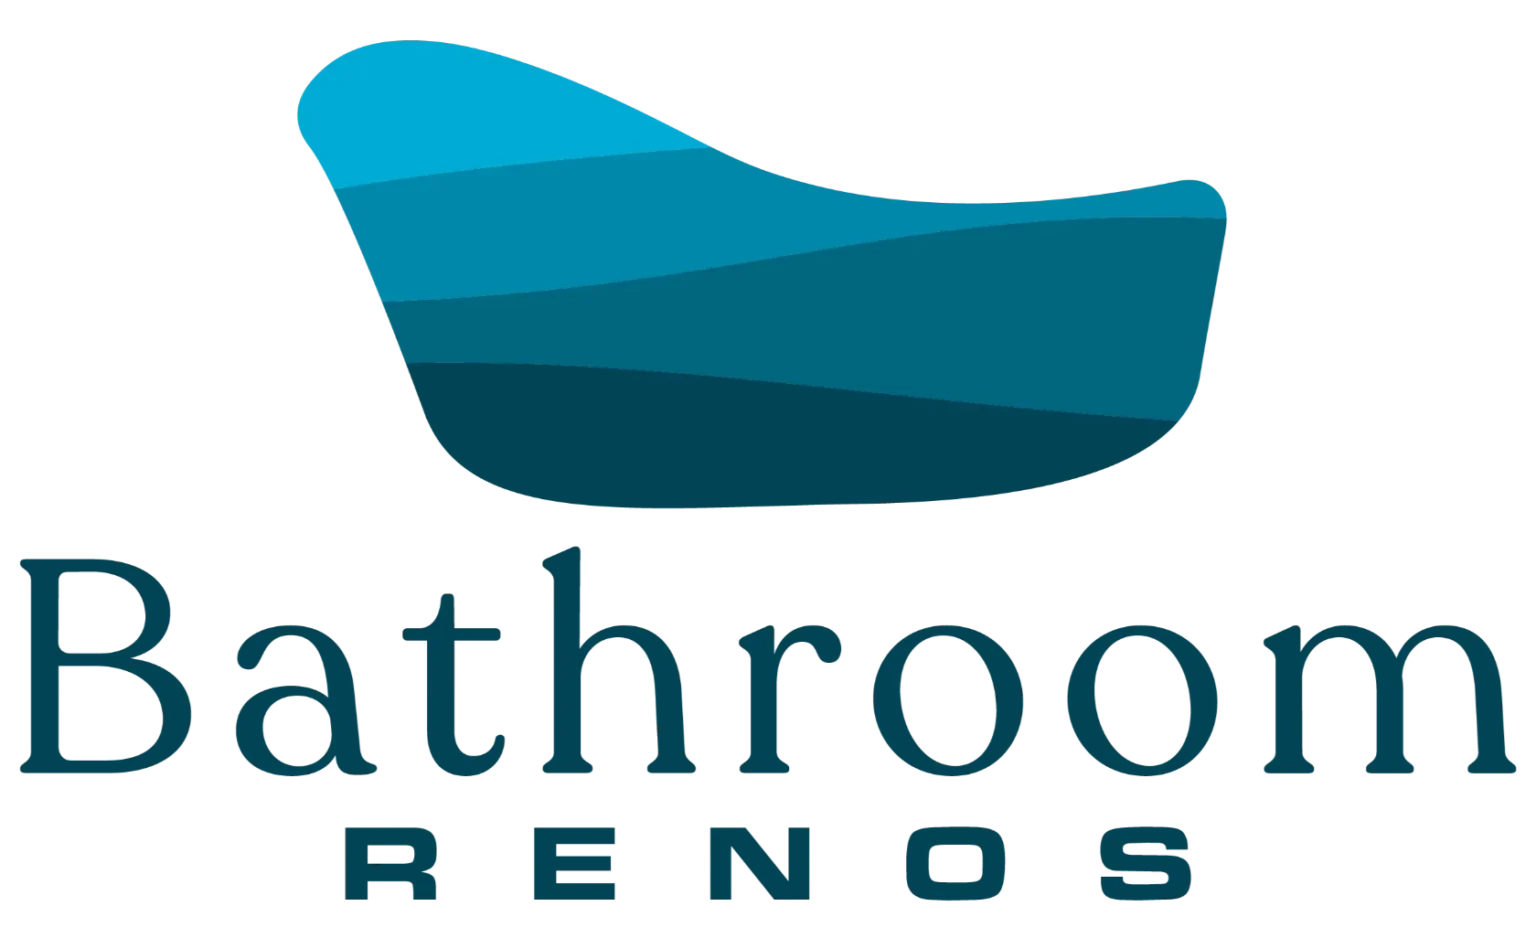 an image about Logo of "bathroom renos" featuring a stylized blue bath shape with the company name below, including a showerhead silhouette.